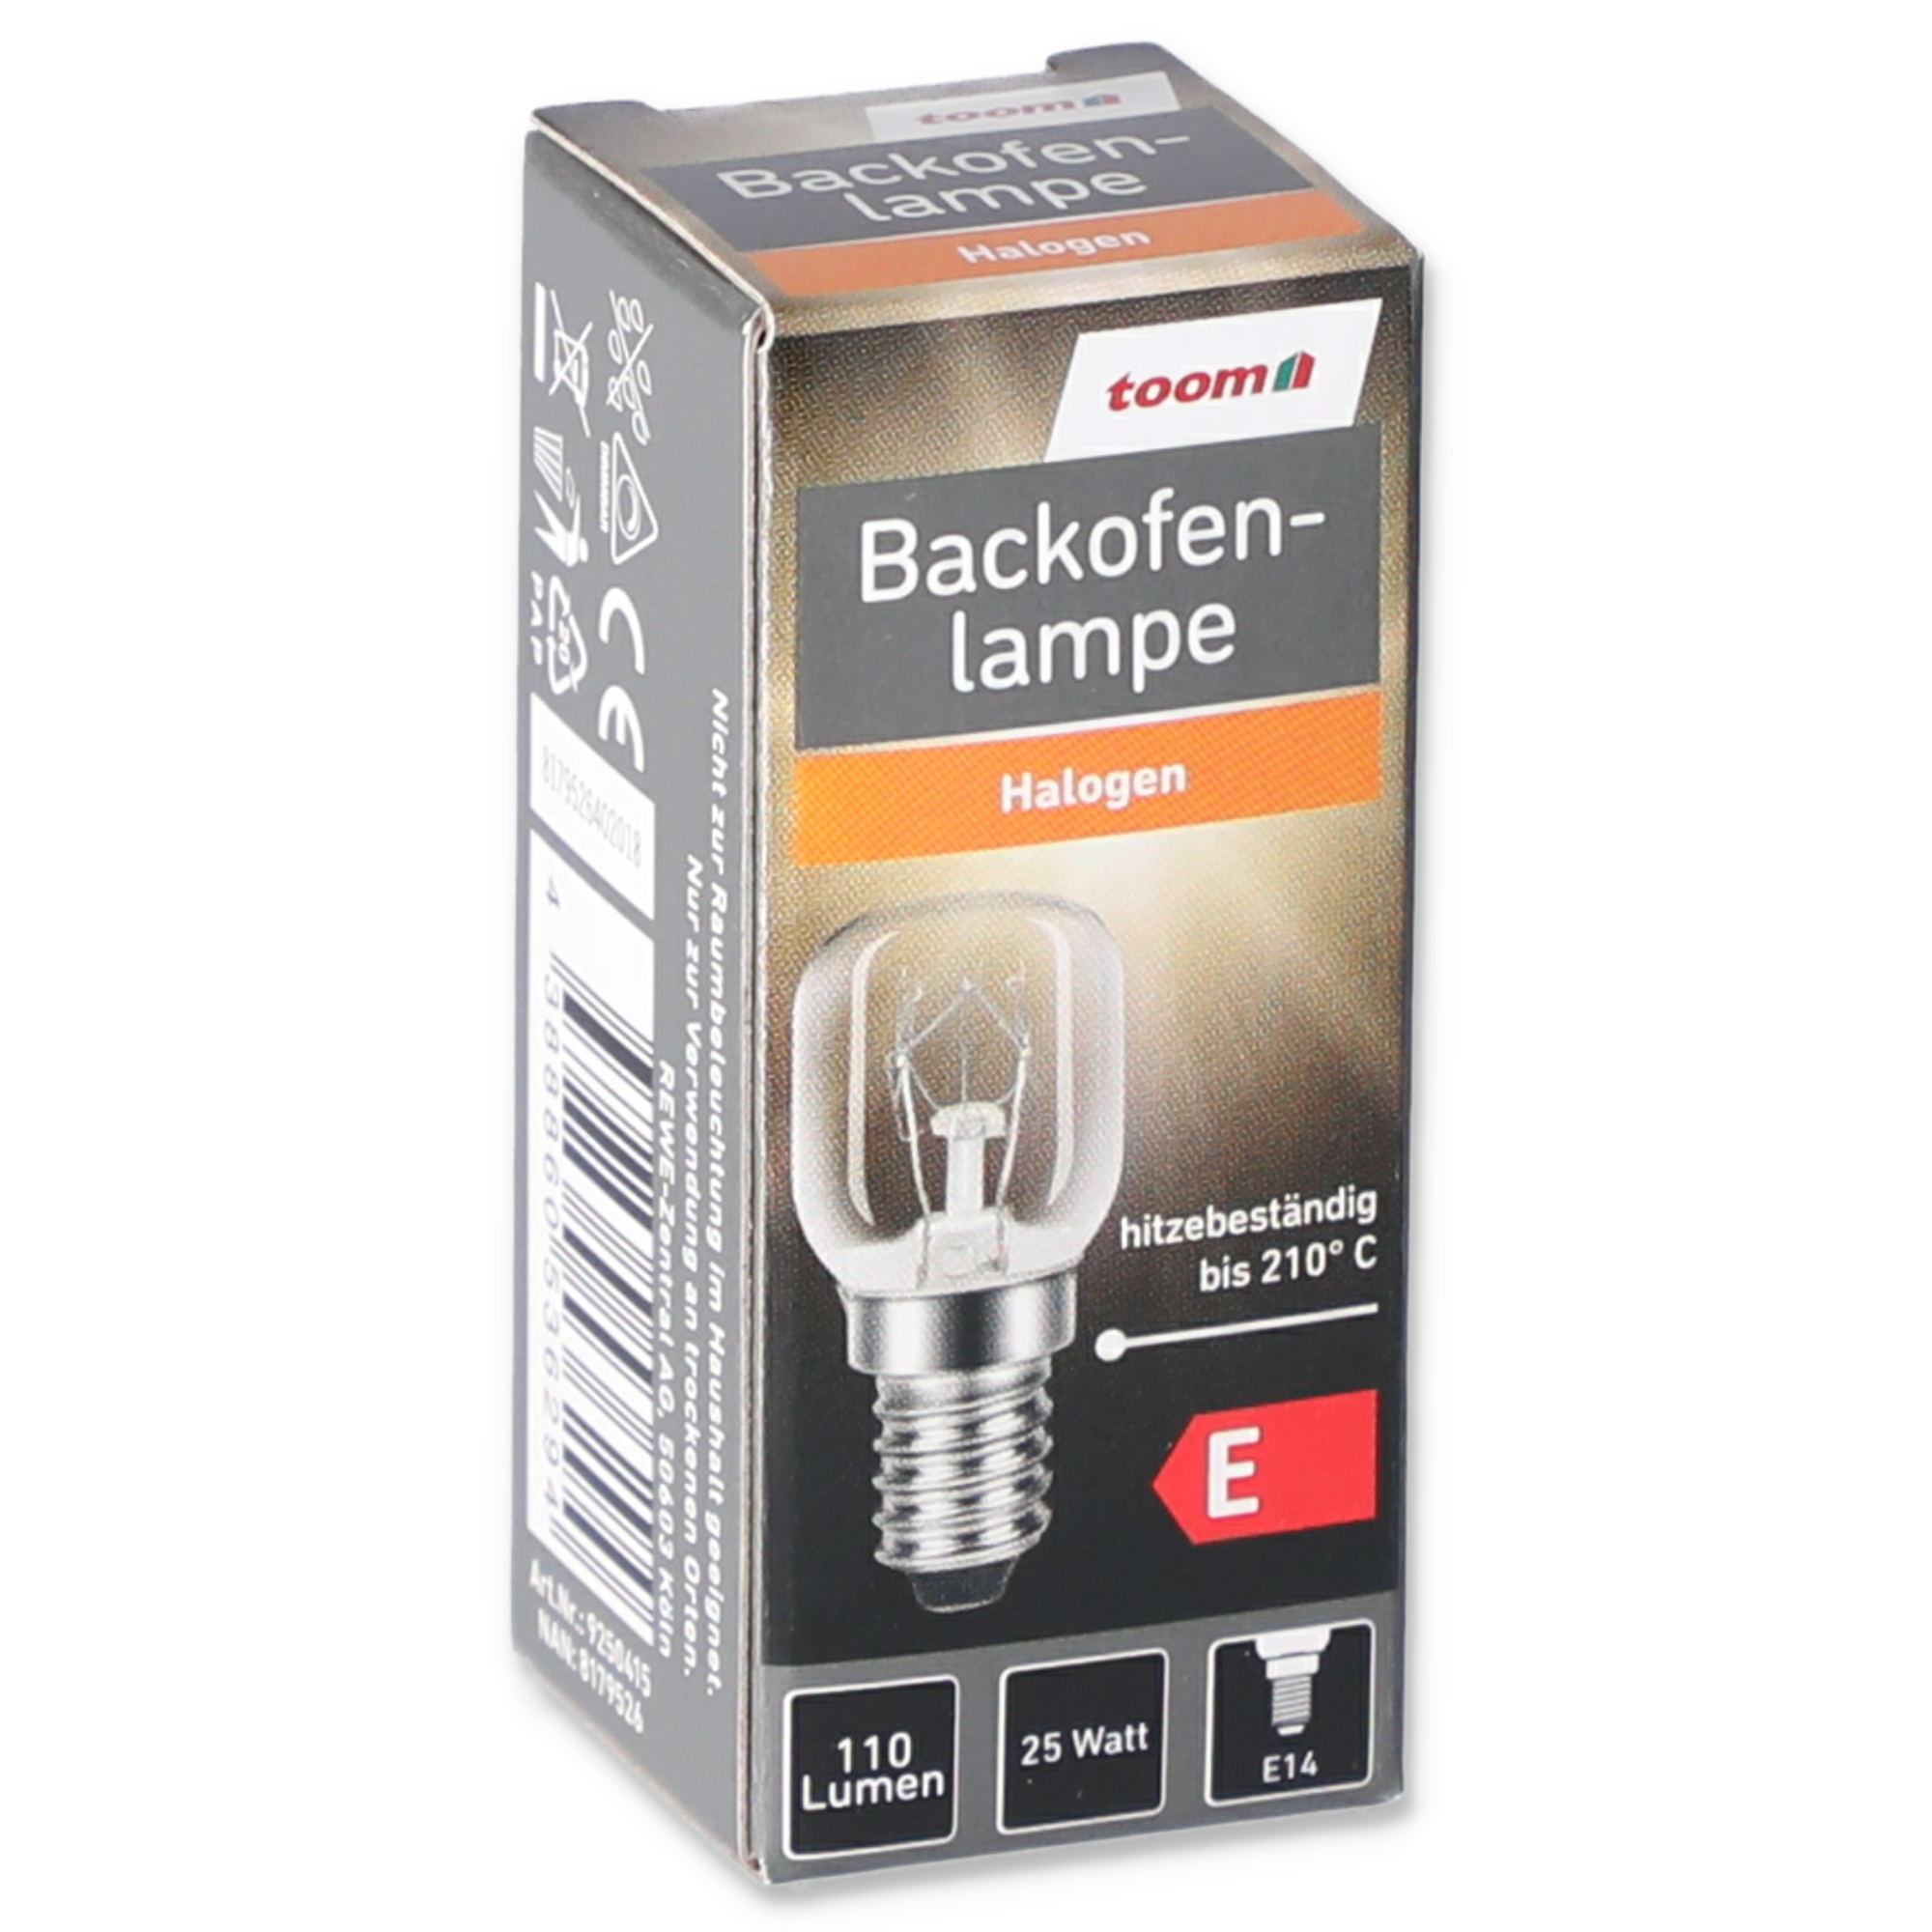 Backofenlampe 110 lm 25 W E14 + product picture